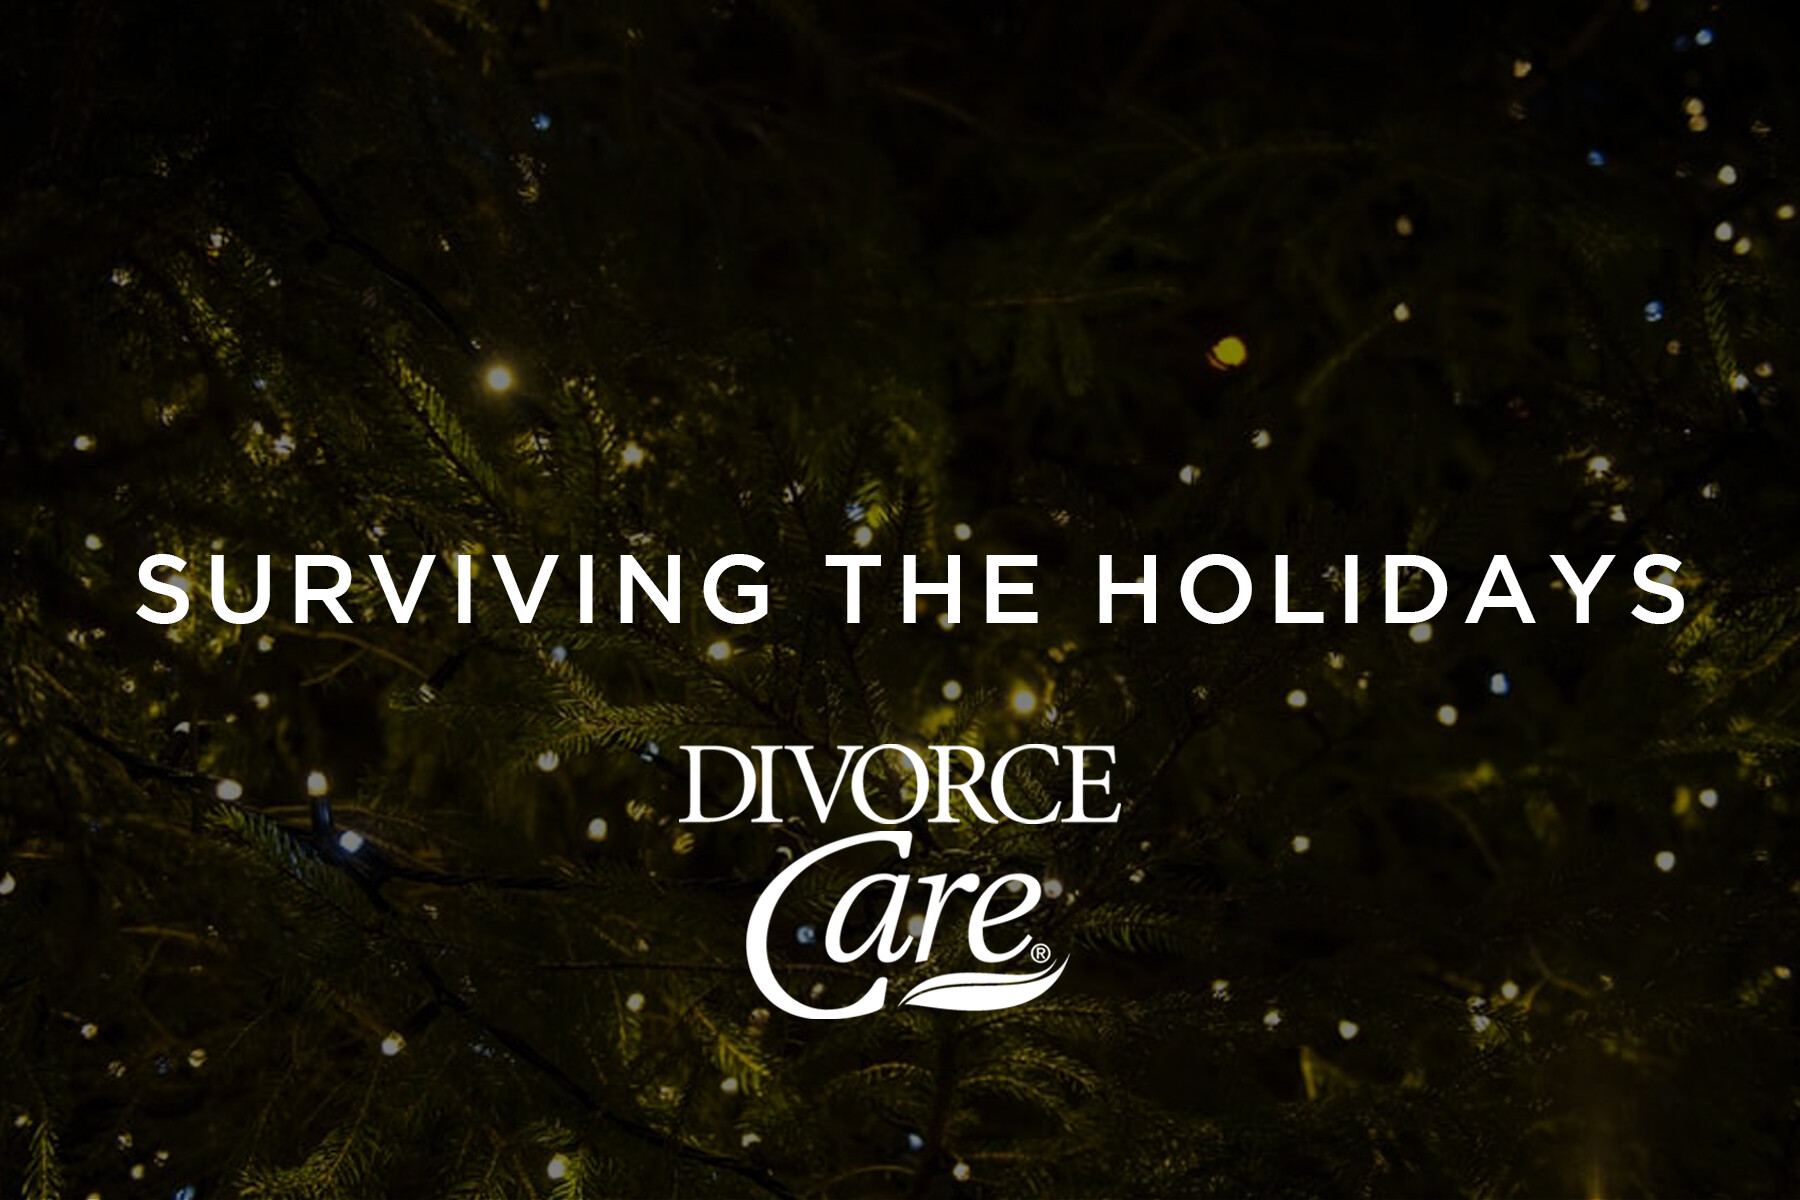 DivorceCare: Surviving The Holidays